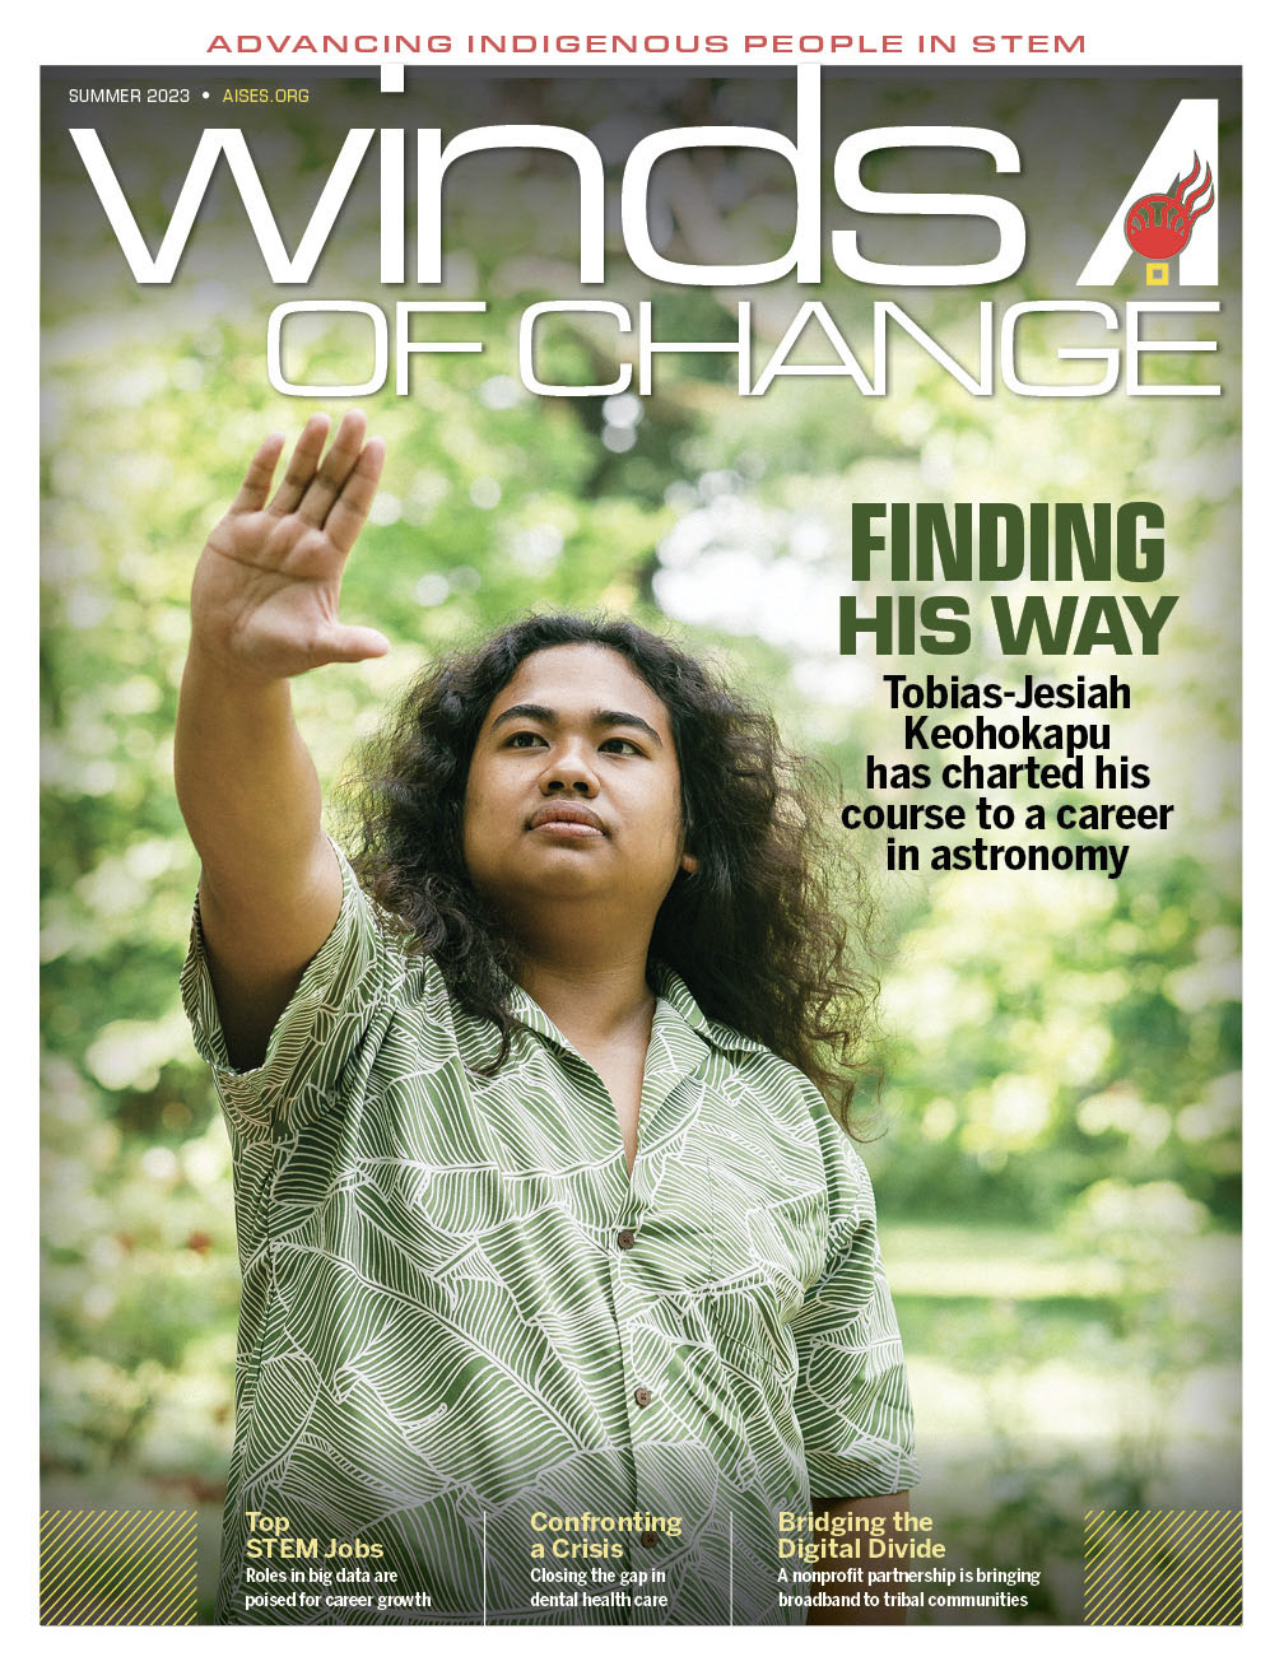 magazine cover with man in green shirt holding hand/arm up into air